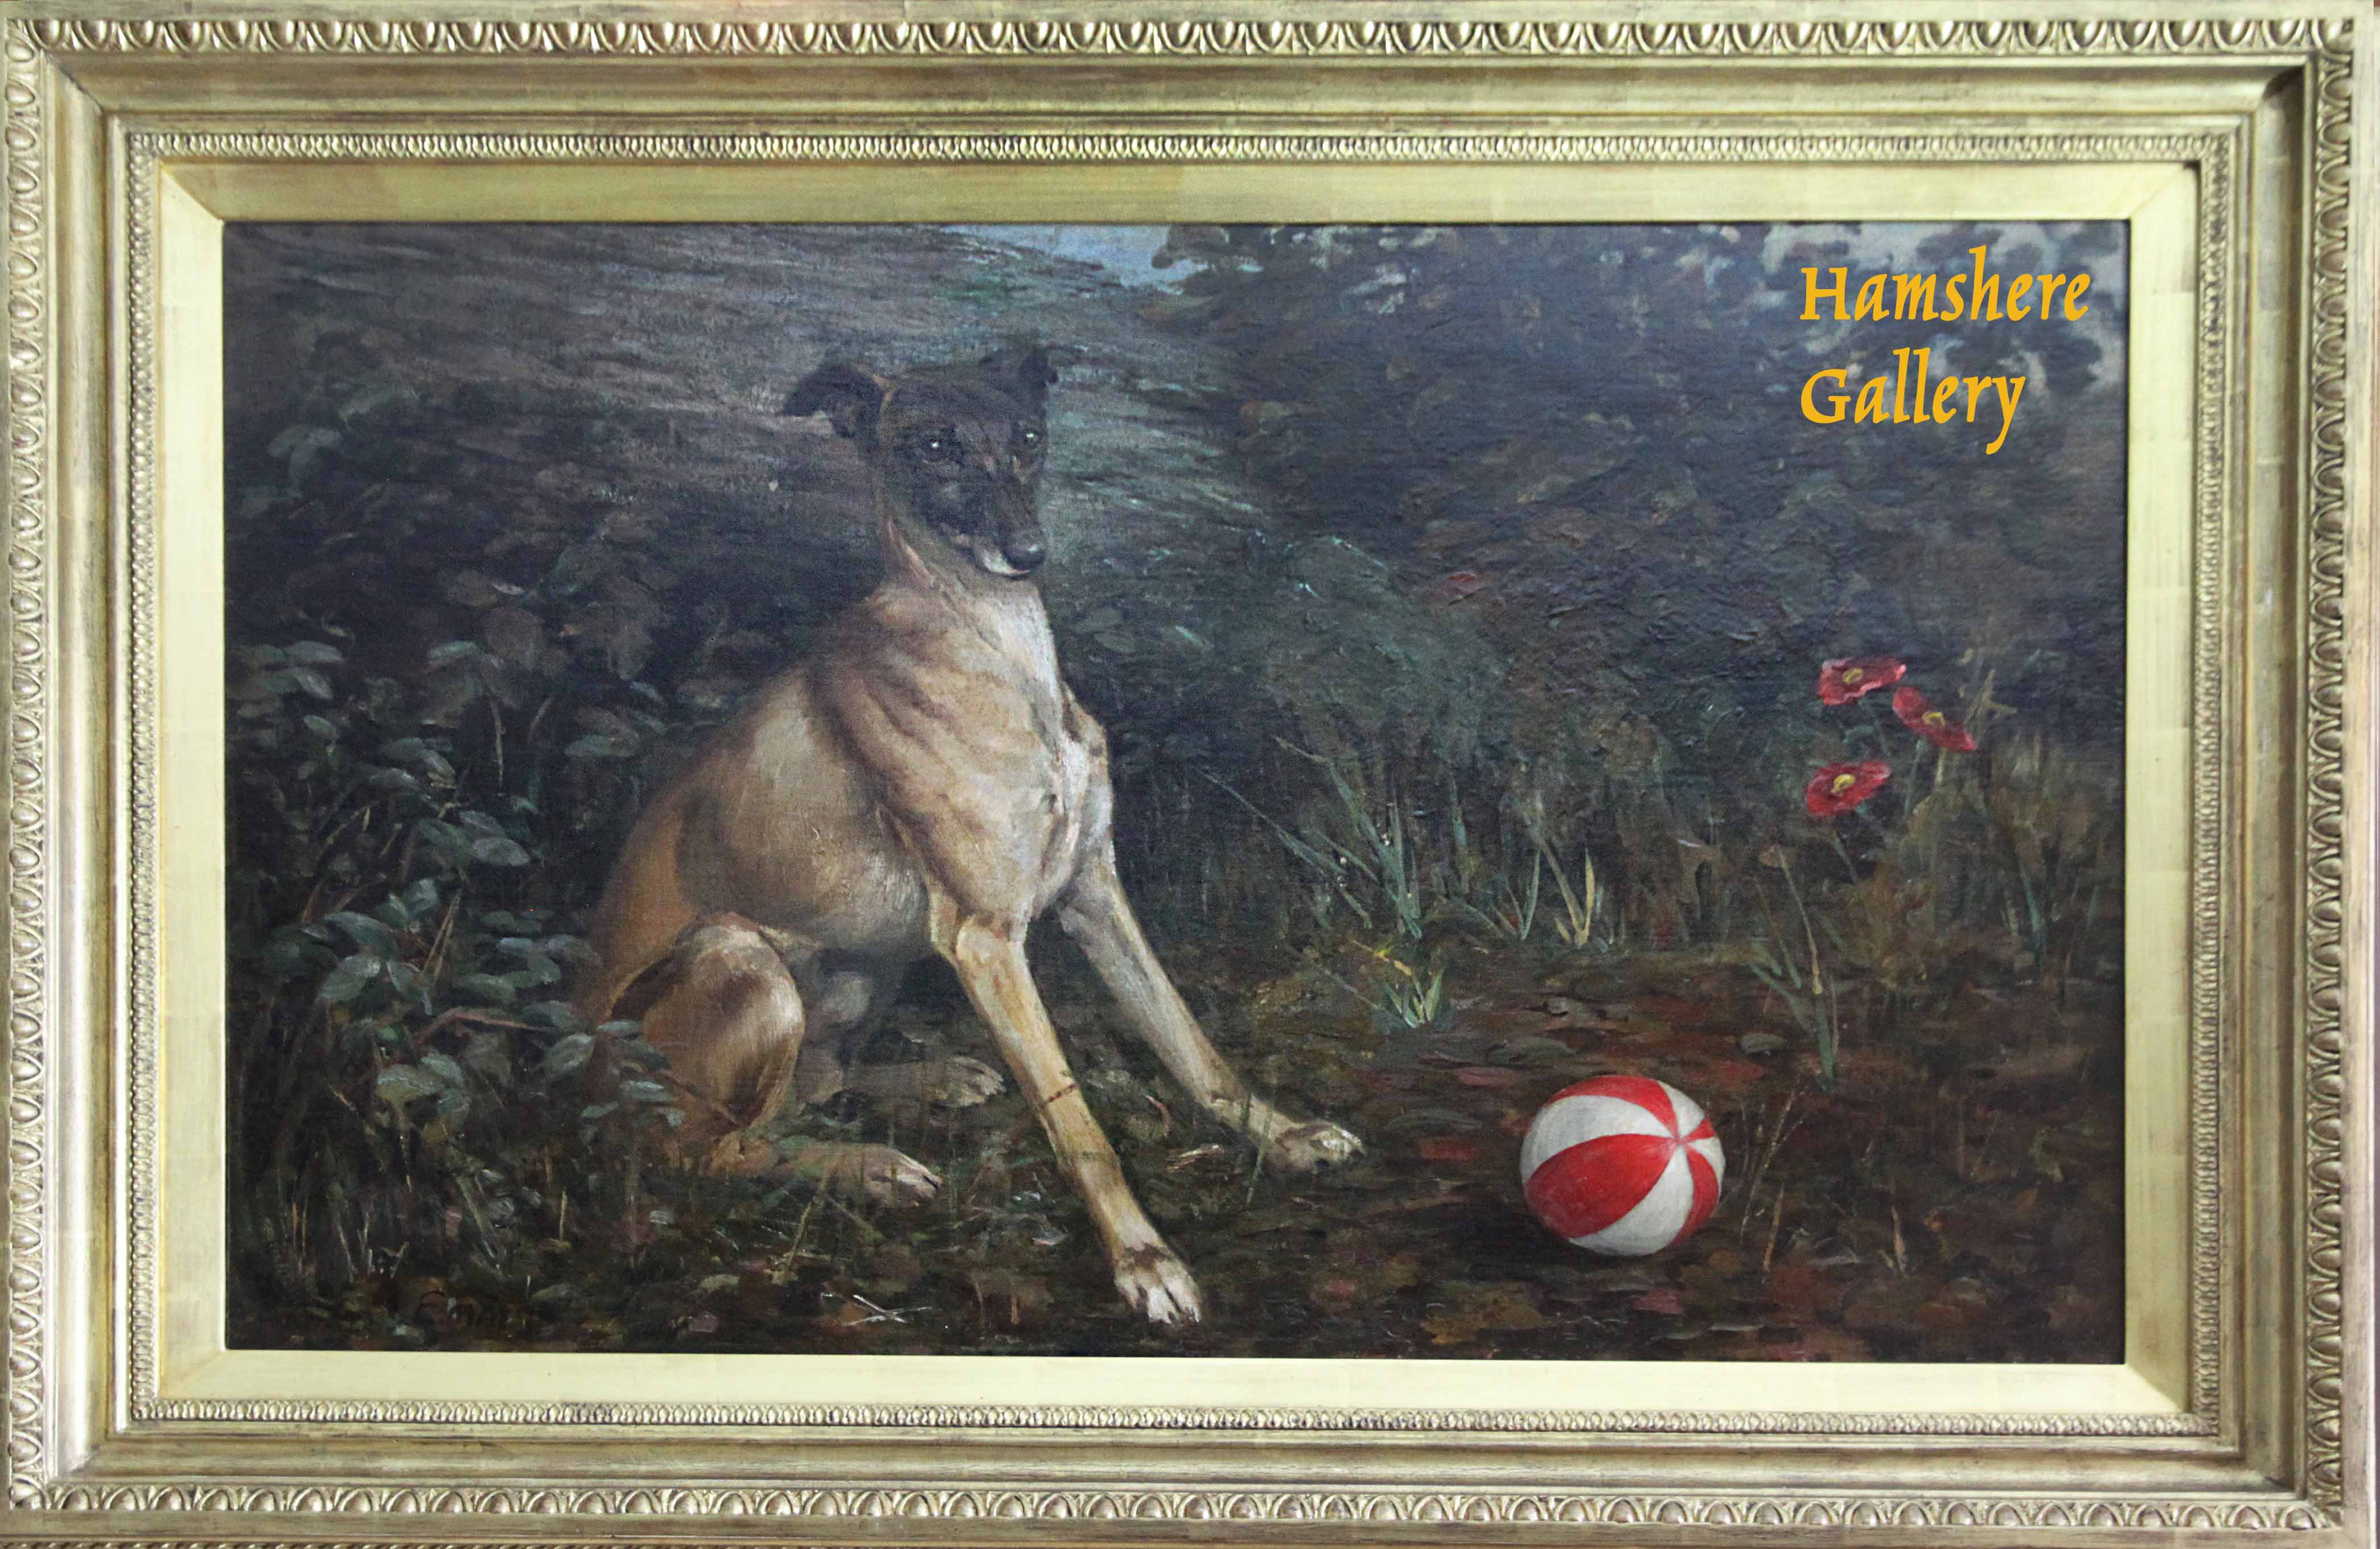 Click for larger image: Oil on canvas of a Greyhound by John Emms (English, 1843-1912). - Oil on canvas of a Greyhound by John Emms (English, 1843-1912).